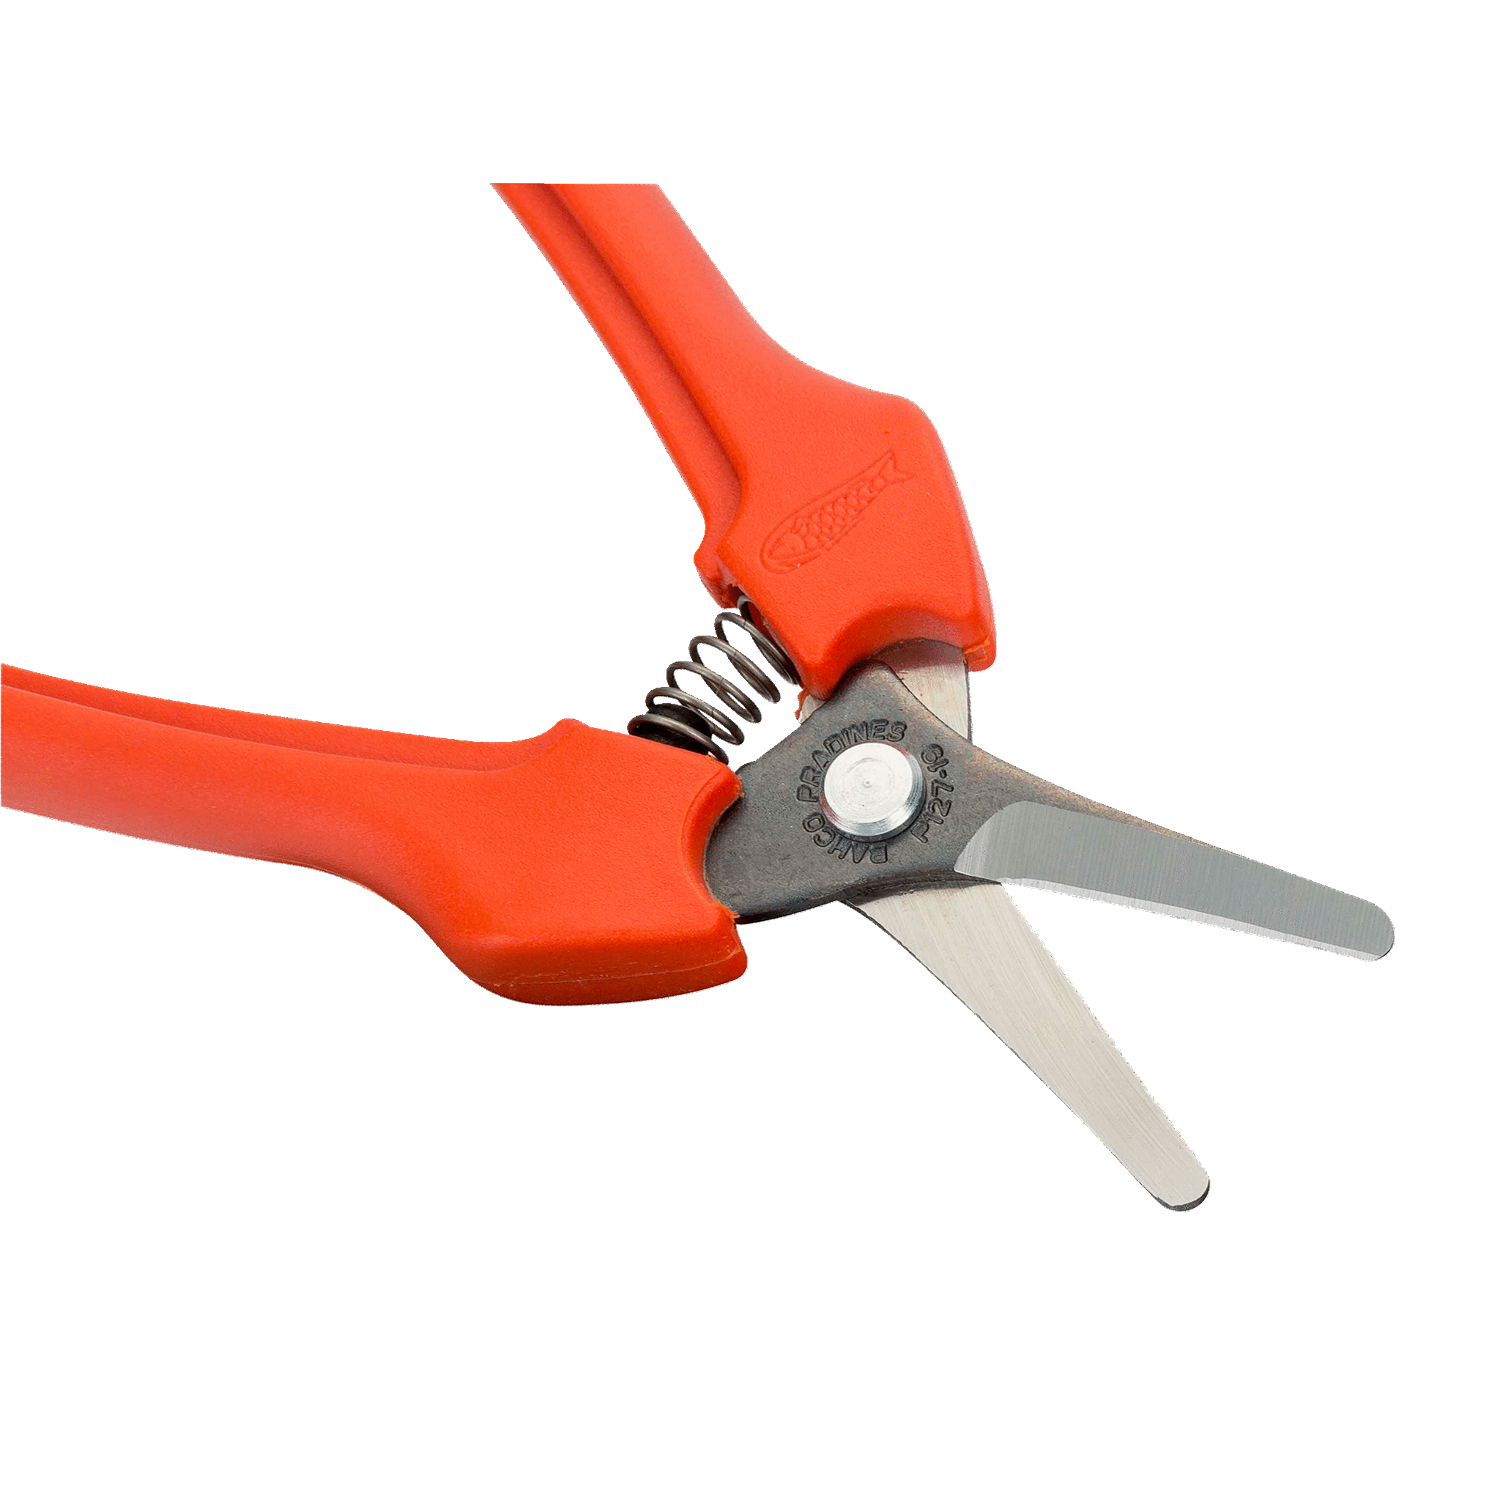 BAHCO P127 Straight Long Snips with Fibreglass Handle - Premium Snips from BAHCO - Shop now at Yew Aik.